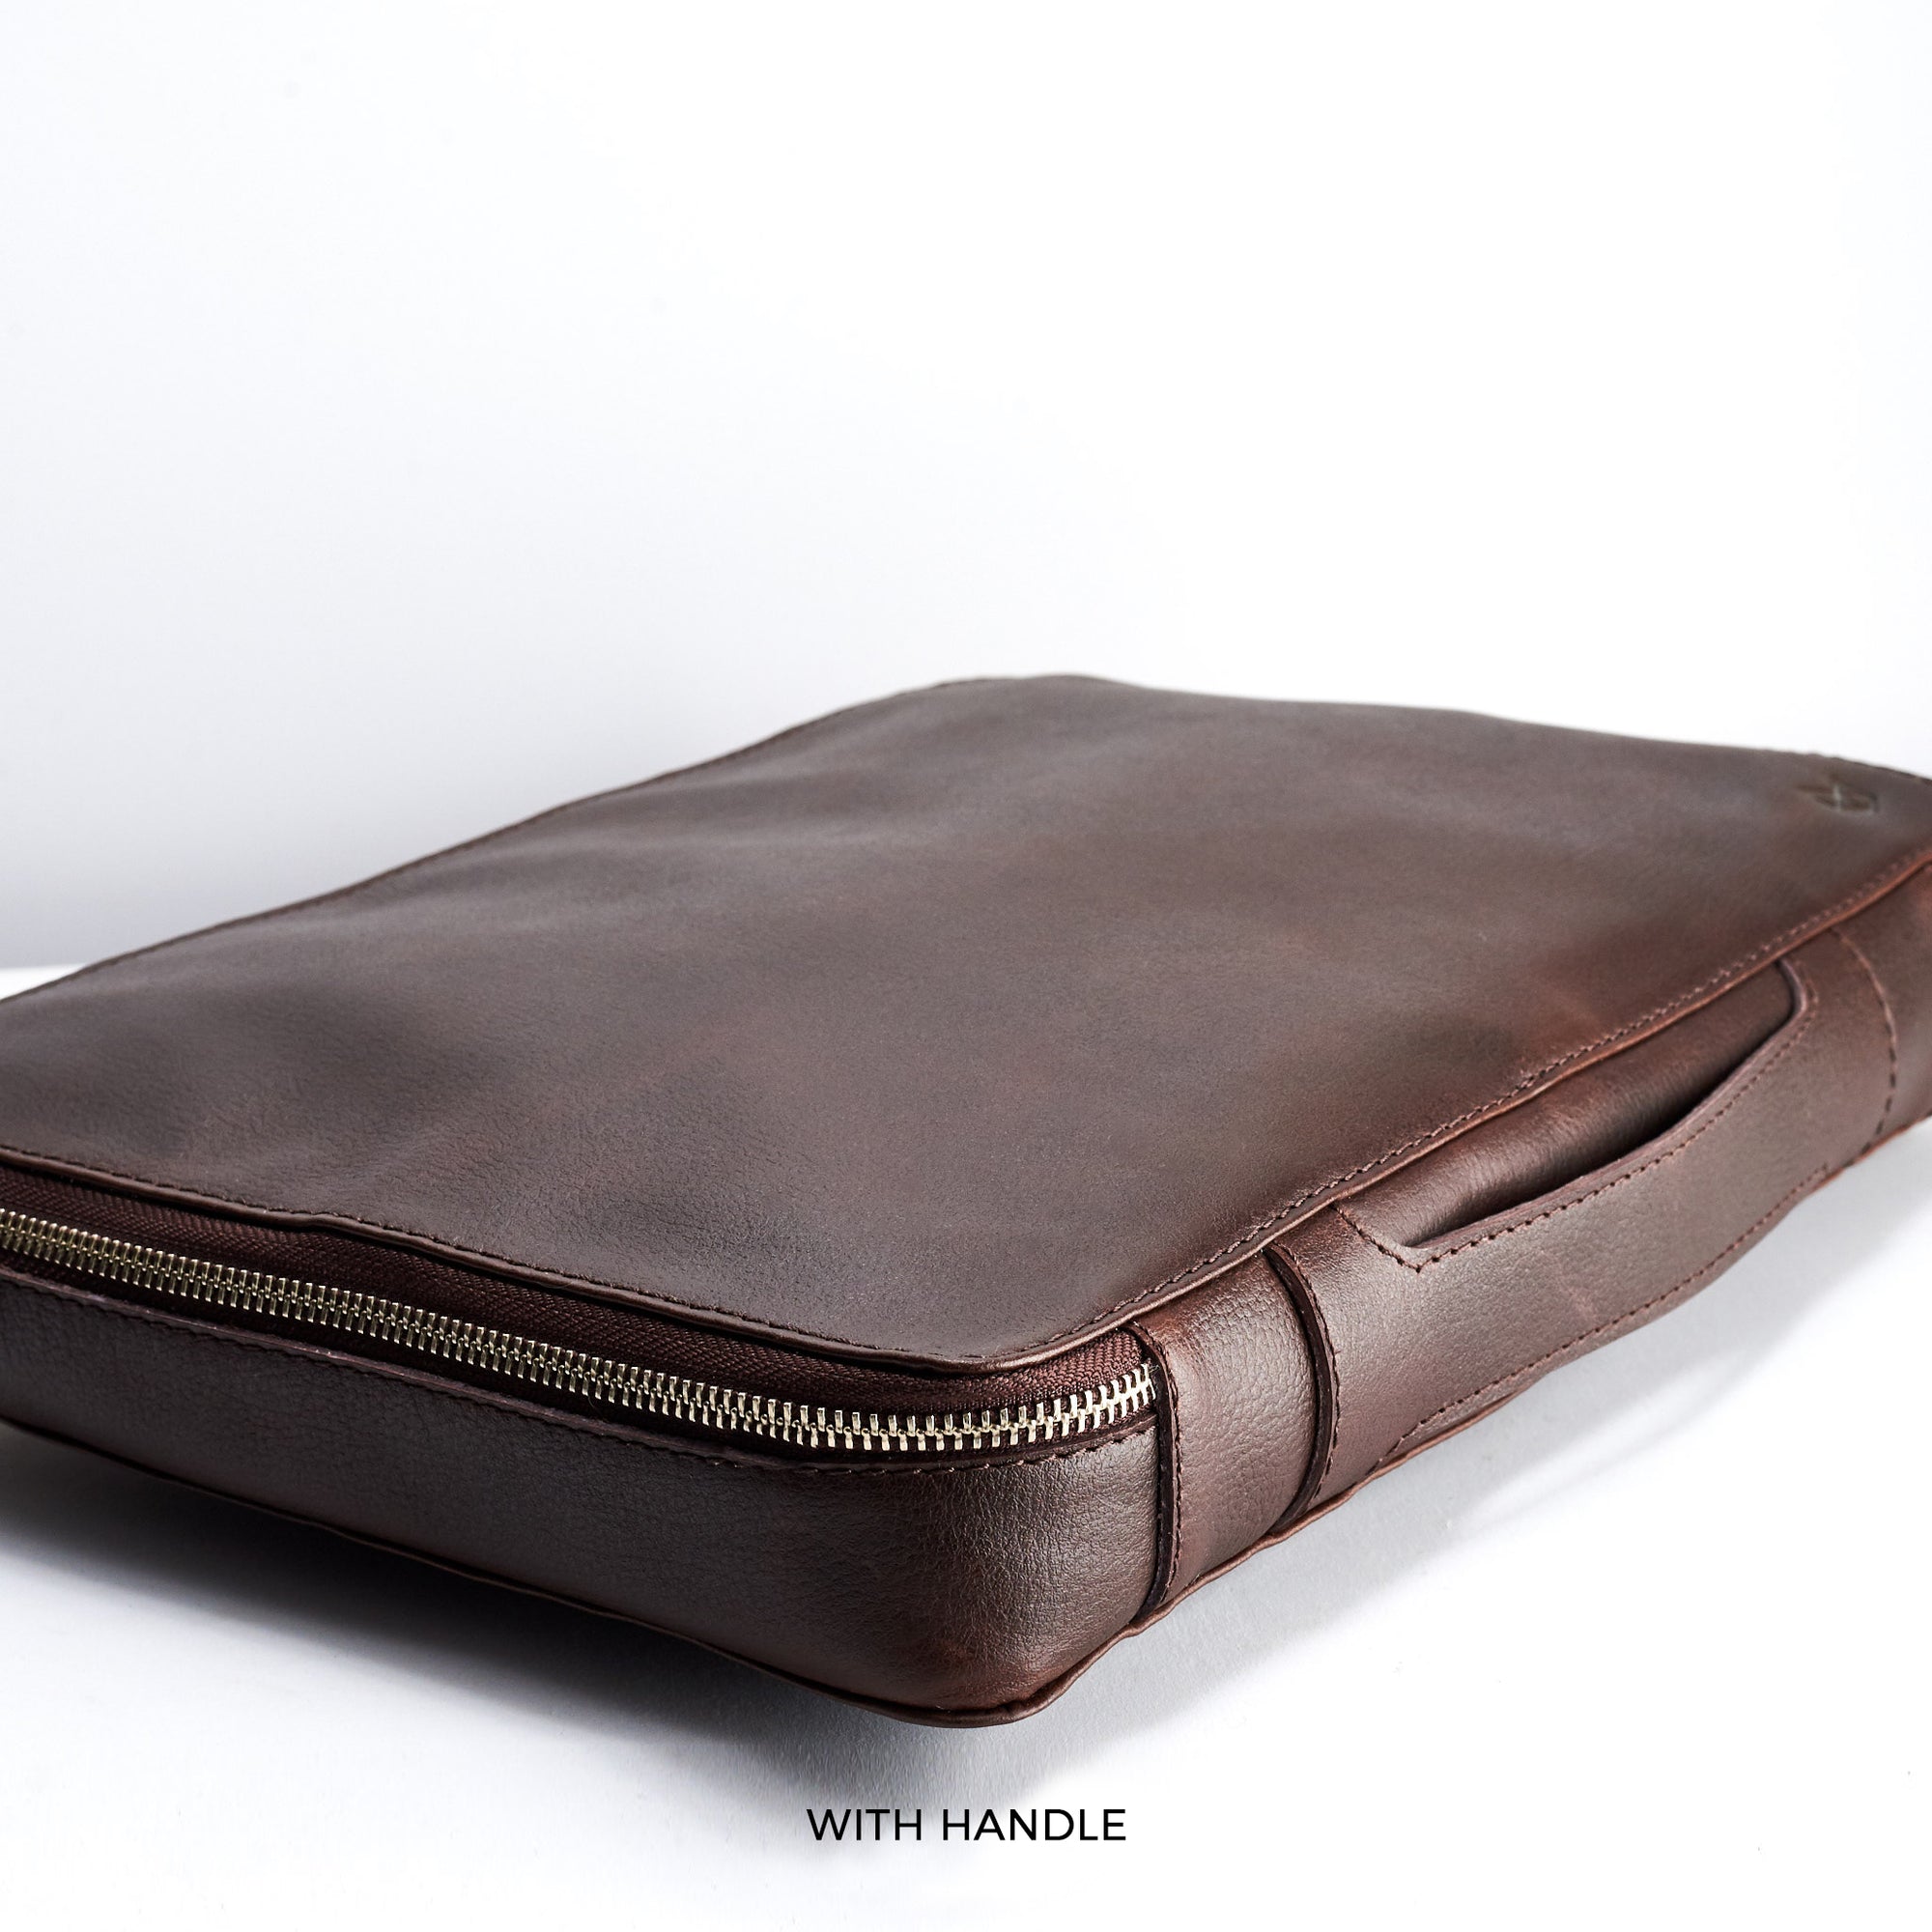 Optional leather handle. Dark Brown tech organizer pouch by Capra Leather. Fits iPad Pro 12.9 inch and MacBook Pro 14 inch